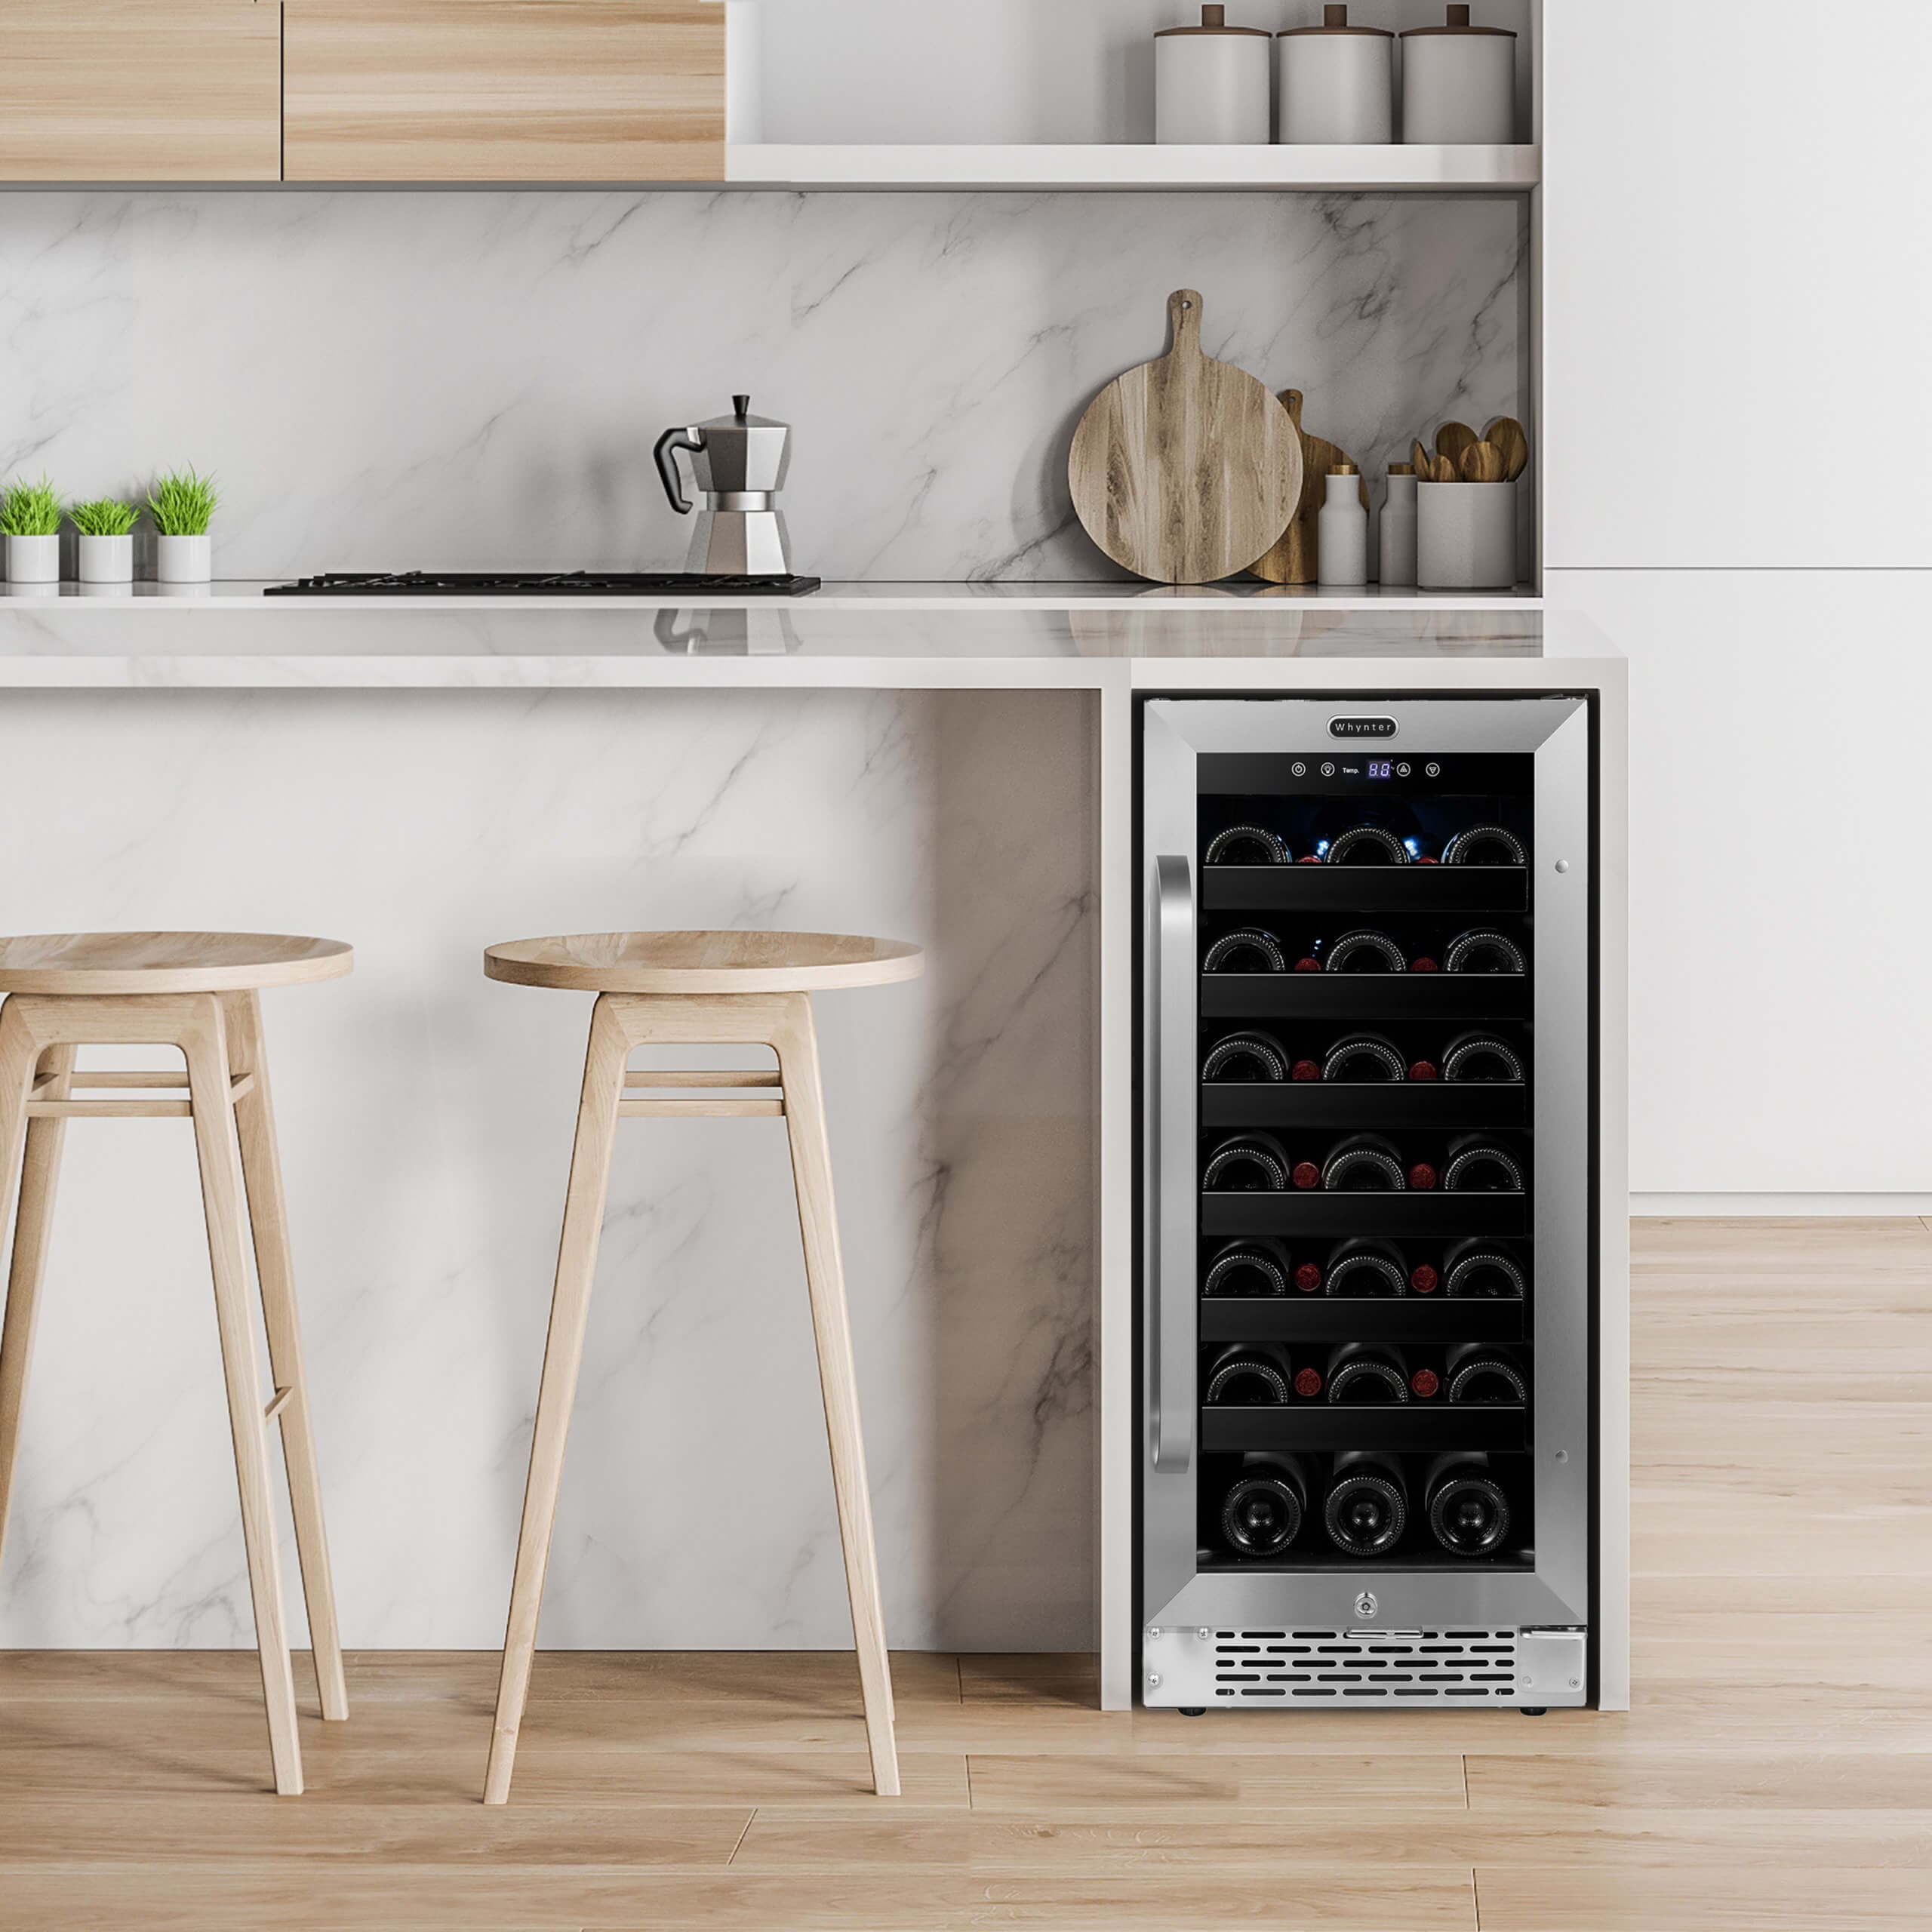 Whynter Whynter BWR-308SB 15 inch Built-In 33 Bottle Undercounter Stainless Steel Wine Refrigerator with Reversible Door, Digital Control, Lock and Carbon Filter